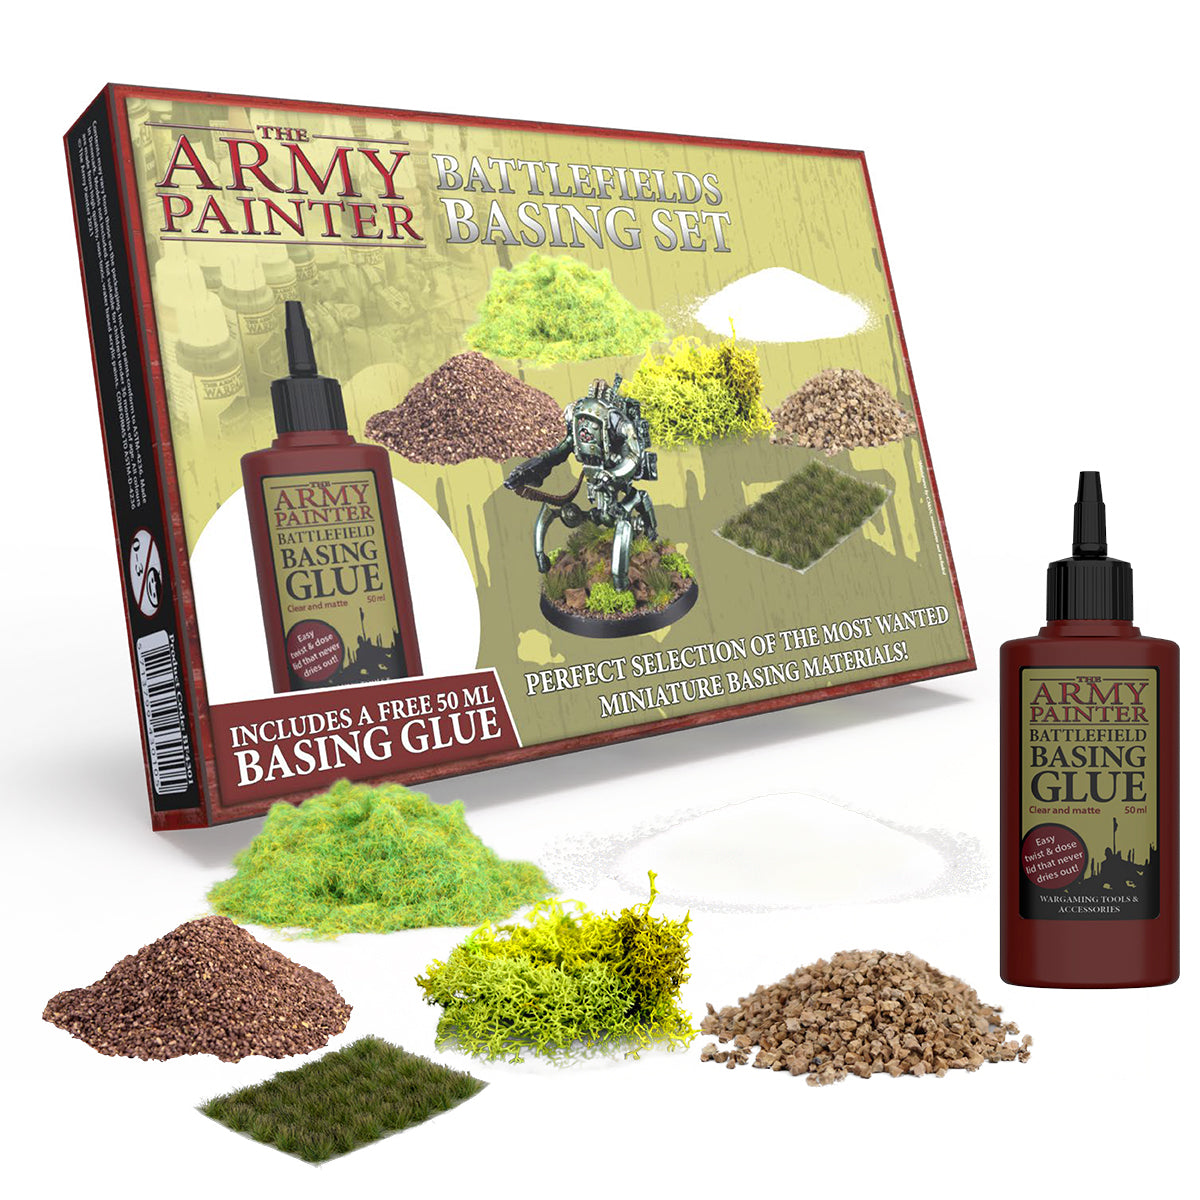 Battlefields Basing Set - A all-in-one basing set - The Army Painter